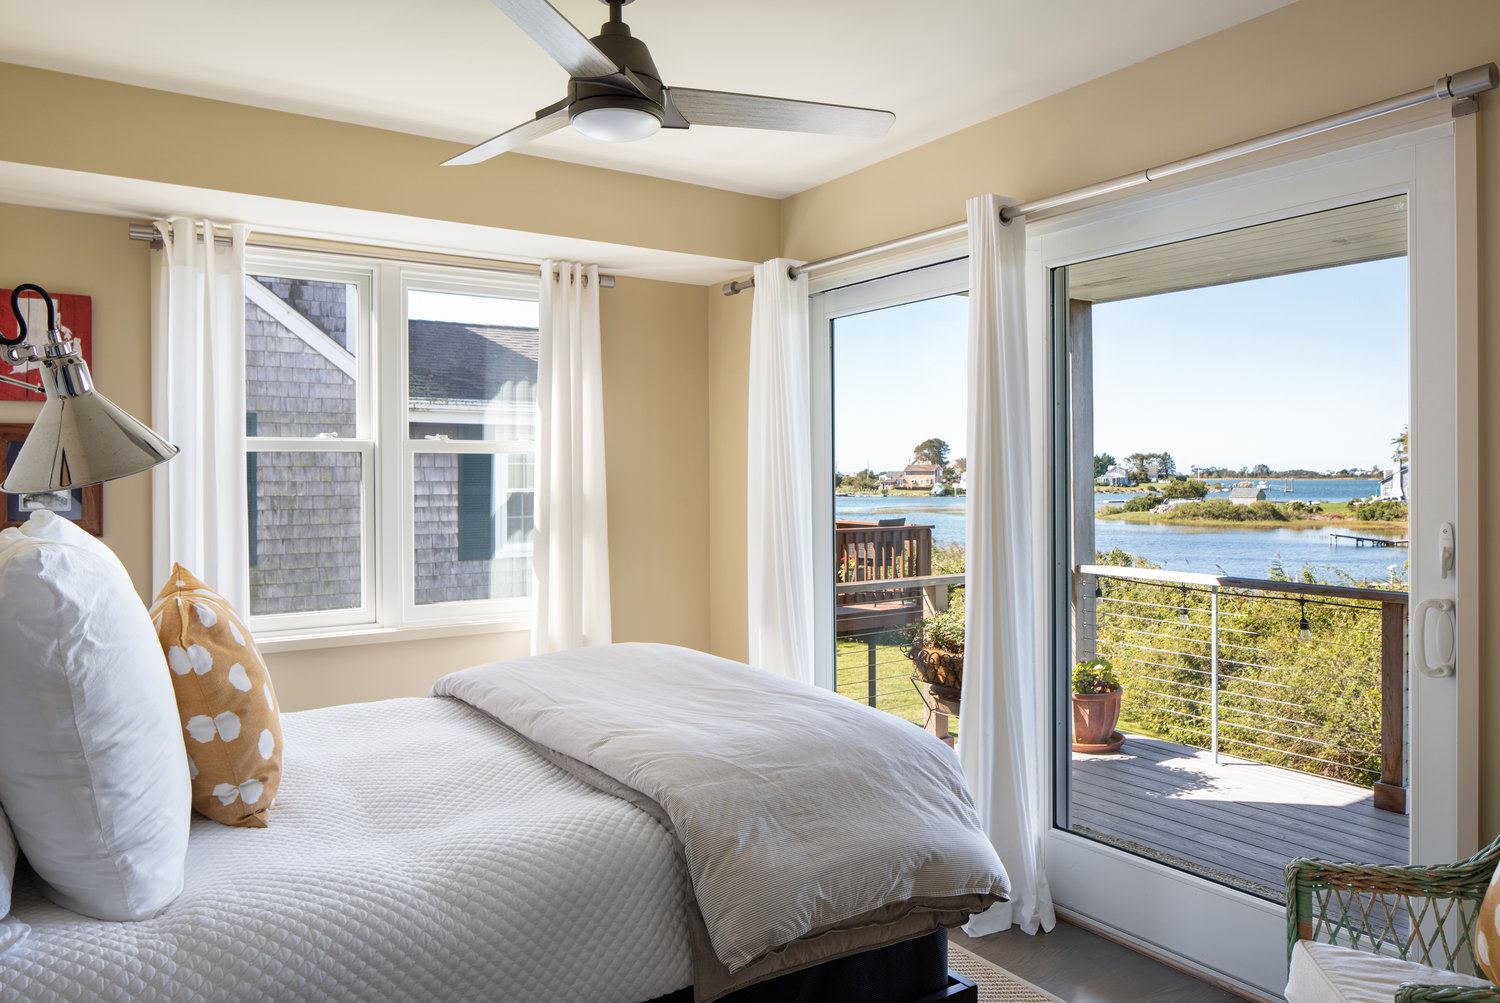 Barely-there window treatments allow for unobstructed views year-round